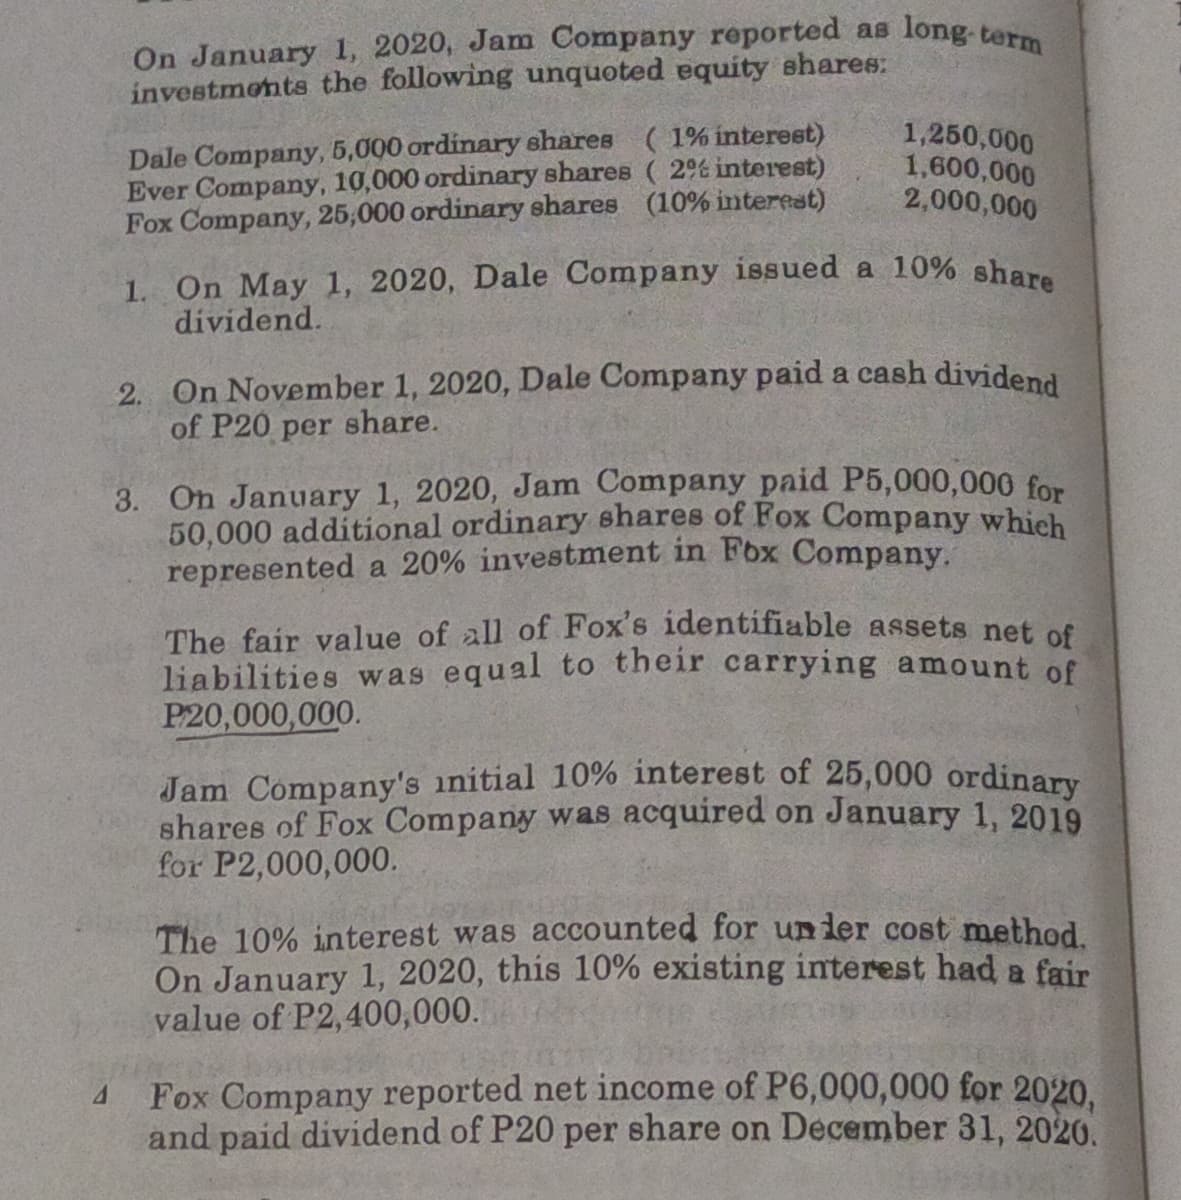 On January 1, 2020, Jam Company reported as
investmonts the following unquoted equity shares:
long term
Dale Company, 5,000 ordinary shares ( 1% interest)
Ever Company, 10,000 ordinary shares ( 2% interest)
Fox Company, 25,000 ordinary shares (10% interest)
1,250,000
1,600,000
2,000,000
1. On May 1, 2020, Dale Company issued a 10% share
dividend.
2. On November 1, 2020, Dale Company paid a cash dividend
of P20 per share.
3. On January 1, 2020, Jam Company paid P5,000,000 for
50,000 additional ordinary shares of Fox Company which
represented a 20% investment in Fbx Company.
The fair value of all of Fox's identifiable assets net of
liabilities was equal to their carrying amount of
P20,000,000.
Jam Company's initial 10% interest of 25,000 ordinary
shares of Fox Company was acquired on January 1, 2019
for P2,000,000.
The 10% interest was accounted for un ler cost method.
On January 1, 2020, this 10% existing interest had a fair
value of P2,400,000.
Fox Company reported net income of P6,000,000 for 2020.
and paid dividend of P20 per share on December 31, 2020.
